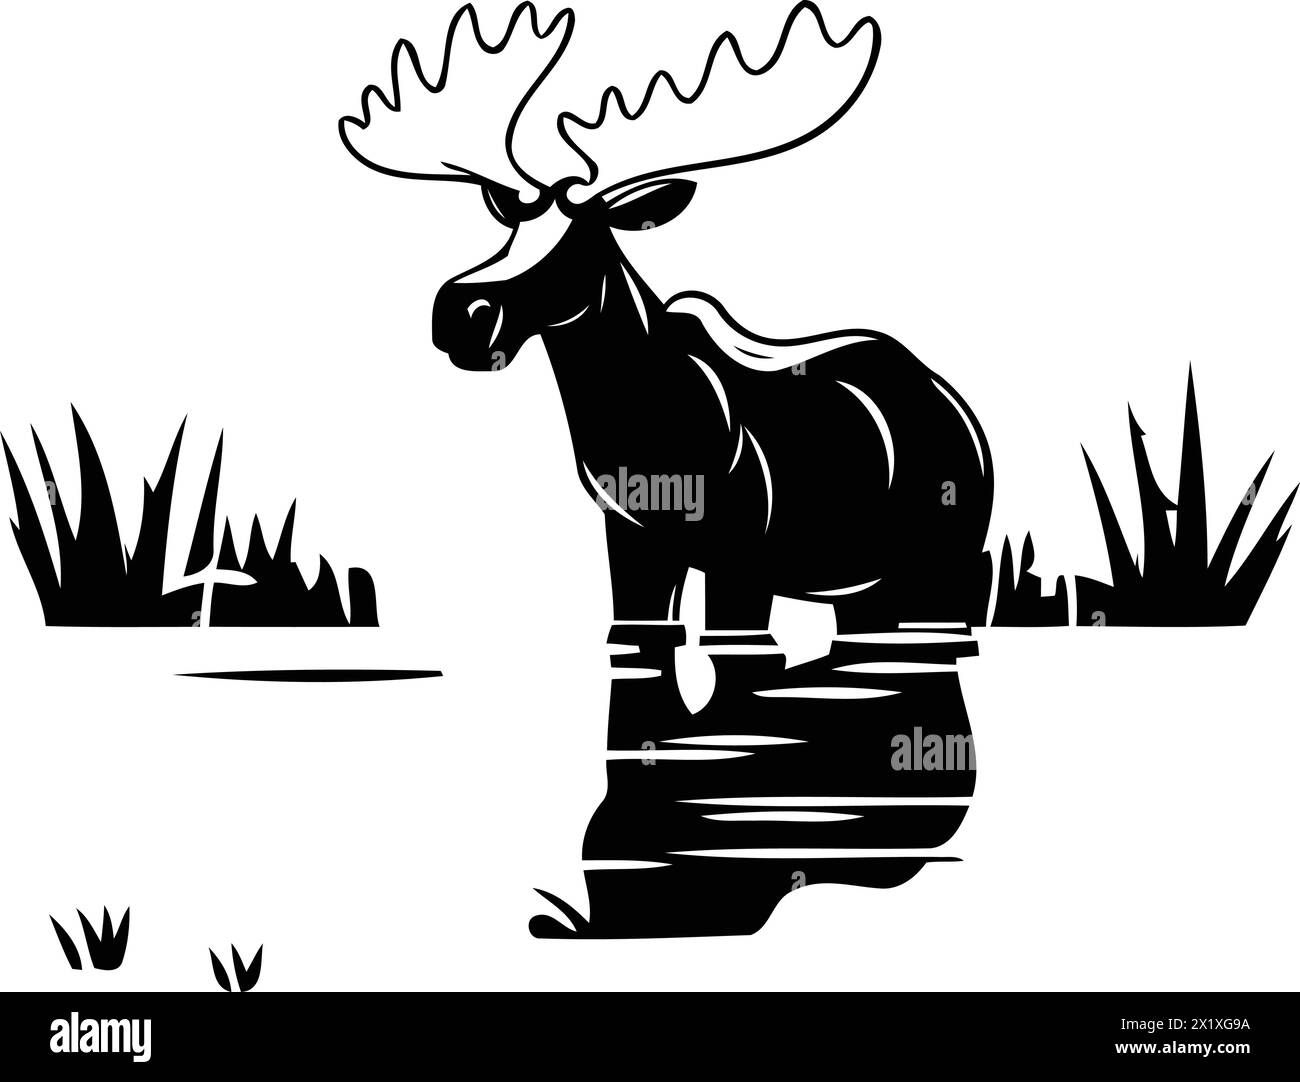 Moose in a pond. Vector illustration of a moose. Stock Vector